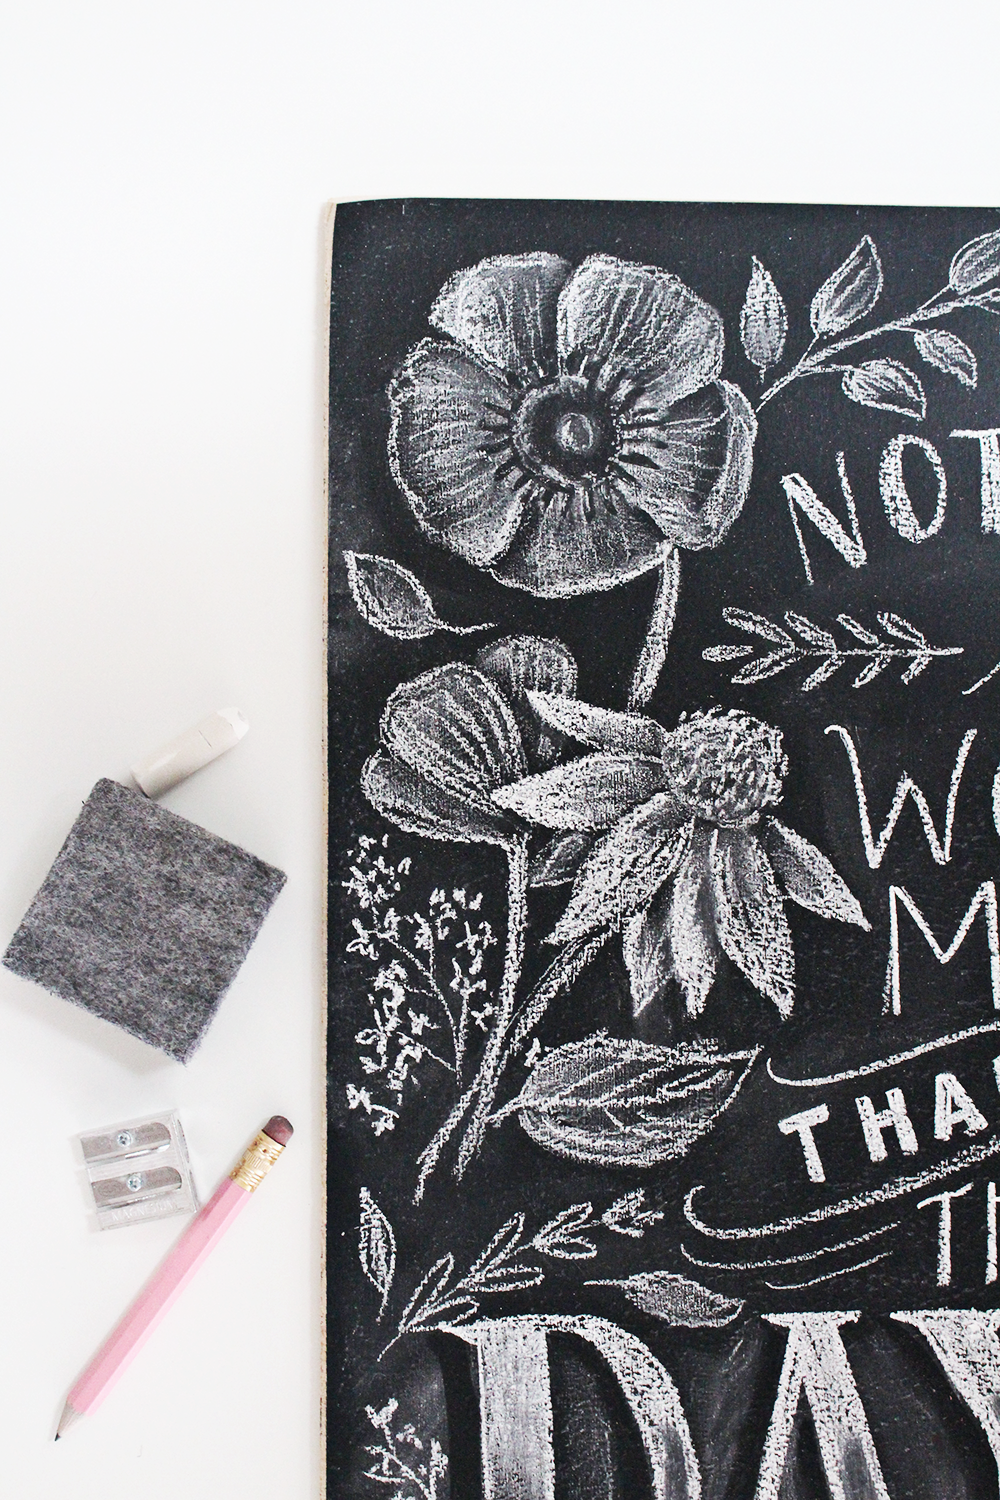 Introducing Chalk Project Nights at the Lily & Val Flagship Store in Pittsburgh. Valerie McKeehan will teach you all the steps for creating this chalkboard sign!